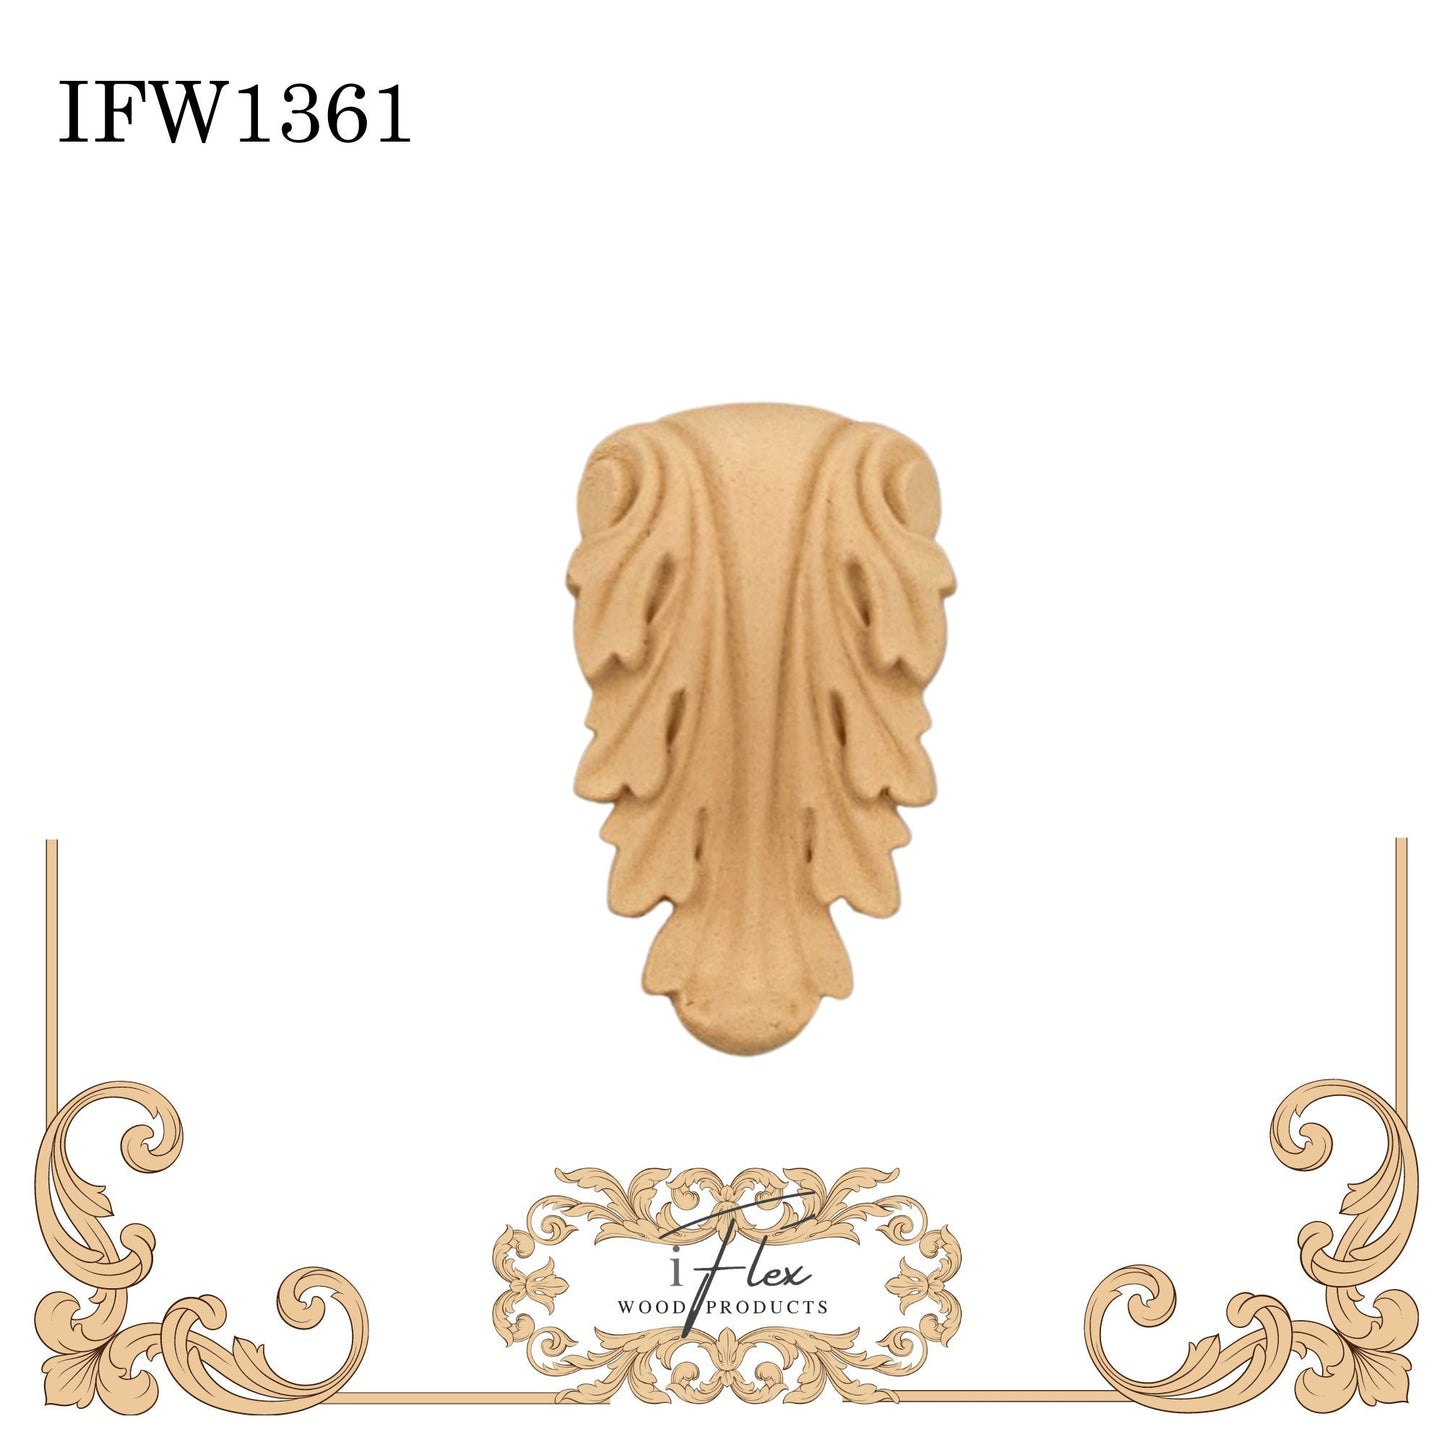 IFW 1361 iFlex Wood Products, bendable mouldings, flexible, wooden appliques, corbel